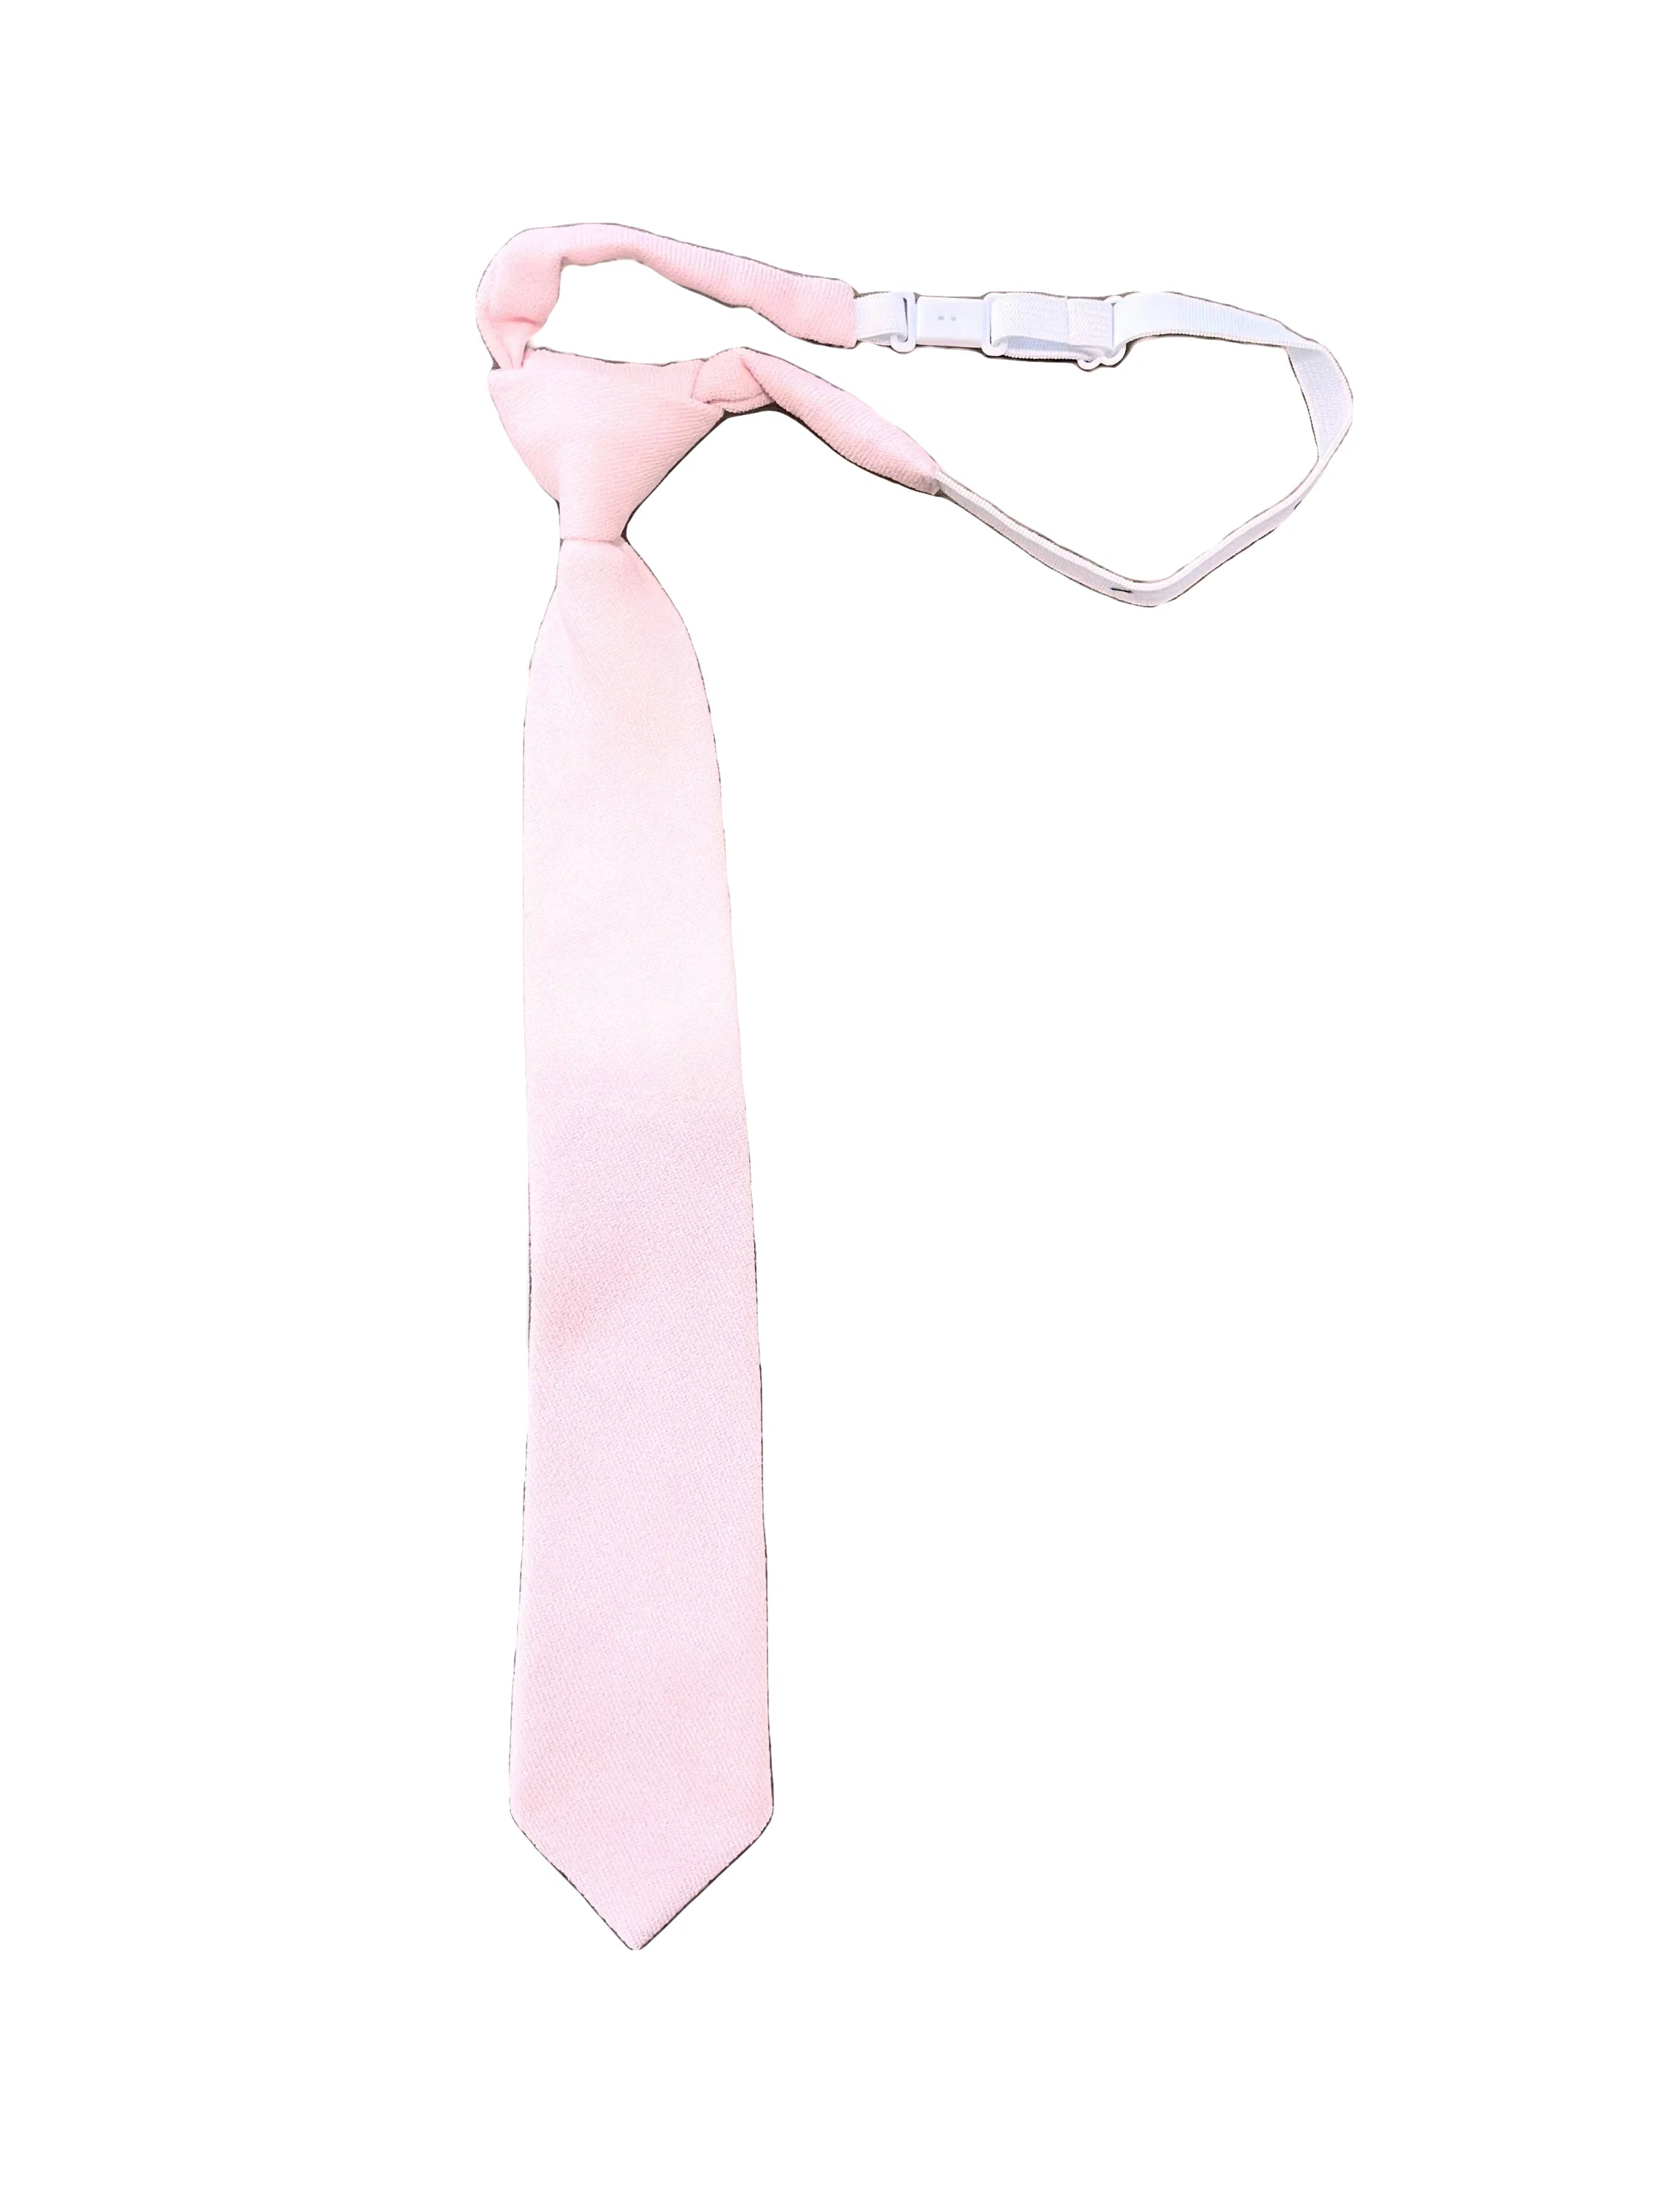 Pink Tie For Kids (Strap) CORA Skinny Fit-Pink Tie For Kids Material: Sued Color: Pink Approx Size: Max width: 6.5 cm / 2.36 inches Length: 37 Cm / 14.56 Inches Have a little one that you need to dress up for a wedding or other formal event? spoil them rotten with this CORA Pink Kids and Toddlers Clip On Tie. This tie is absolutely darling, and will have them looking their best. The clip on design makes it easy to put on and take off, so even the squirmiest of kids can wear it with ease. You&#39;ll 